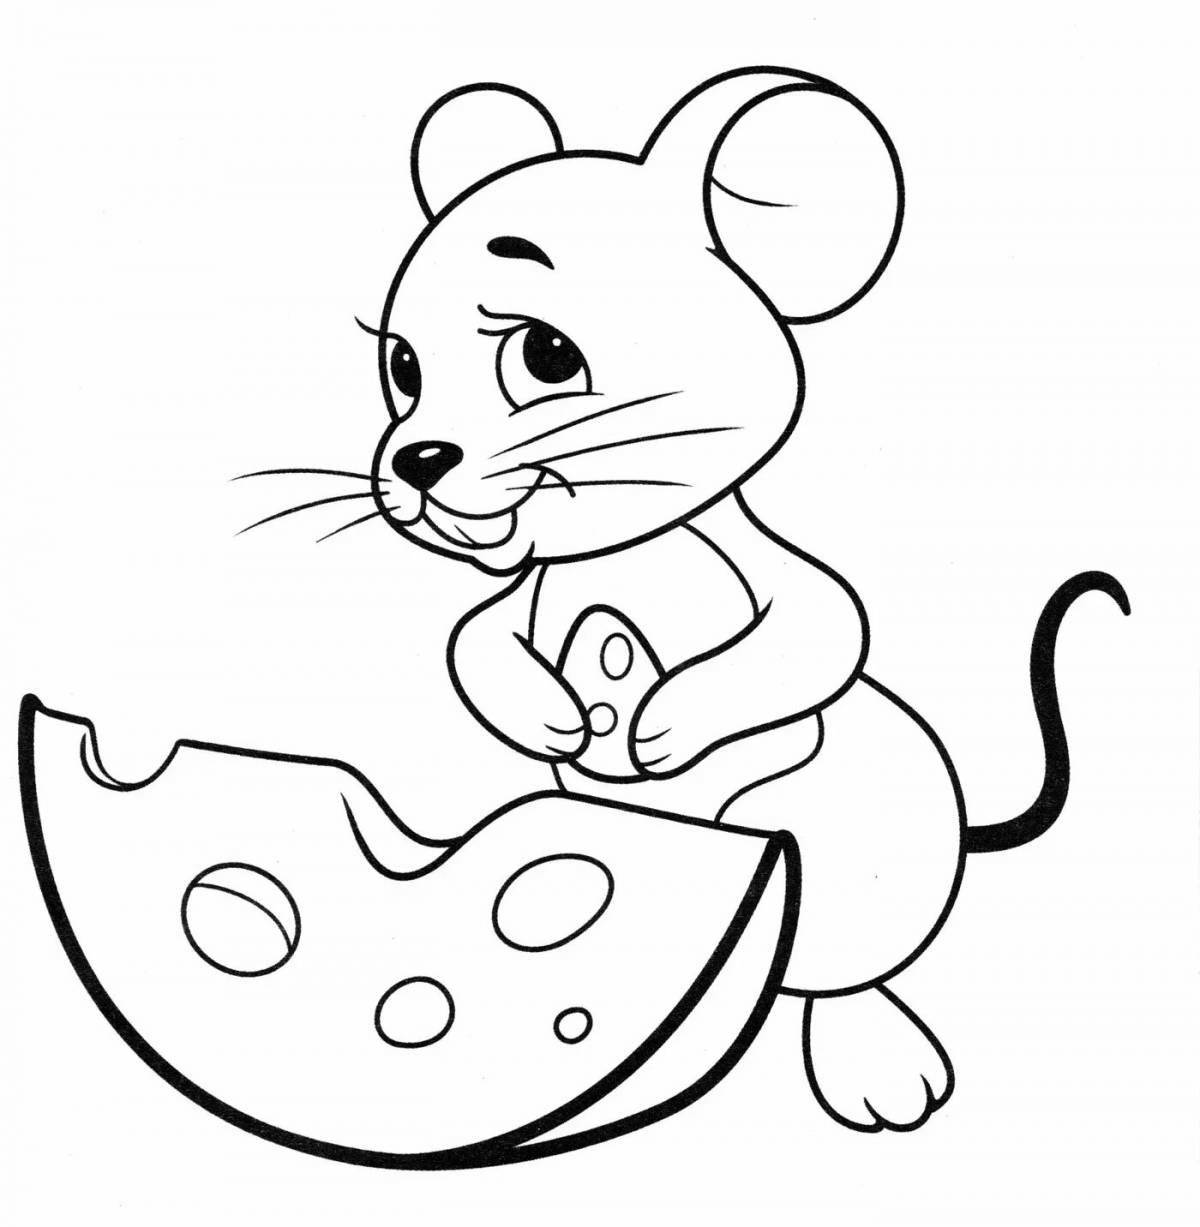 Mouse tim #2